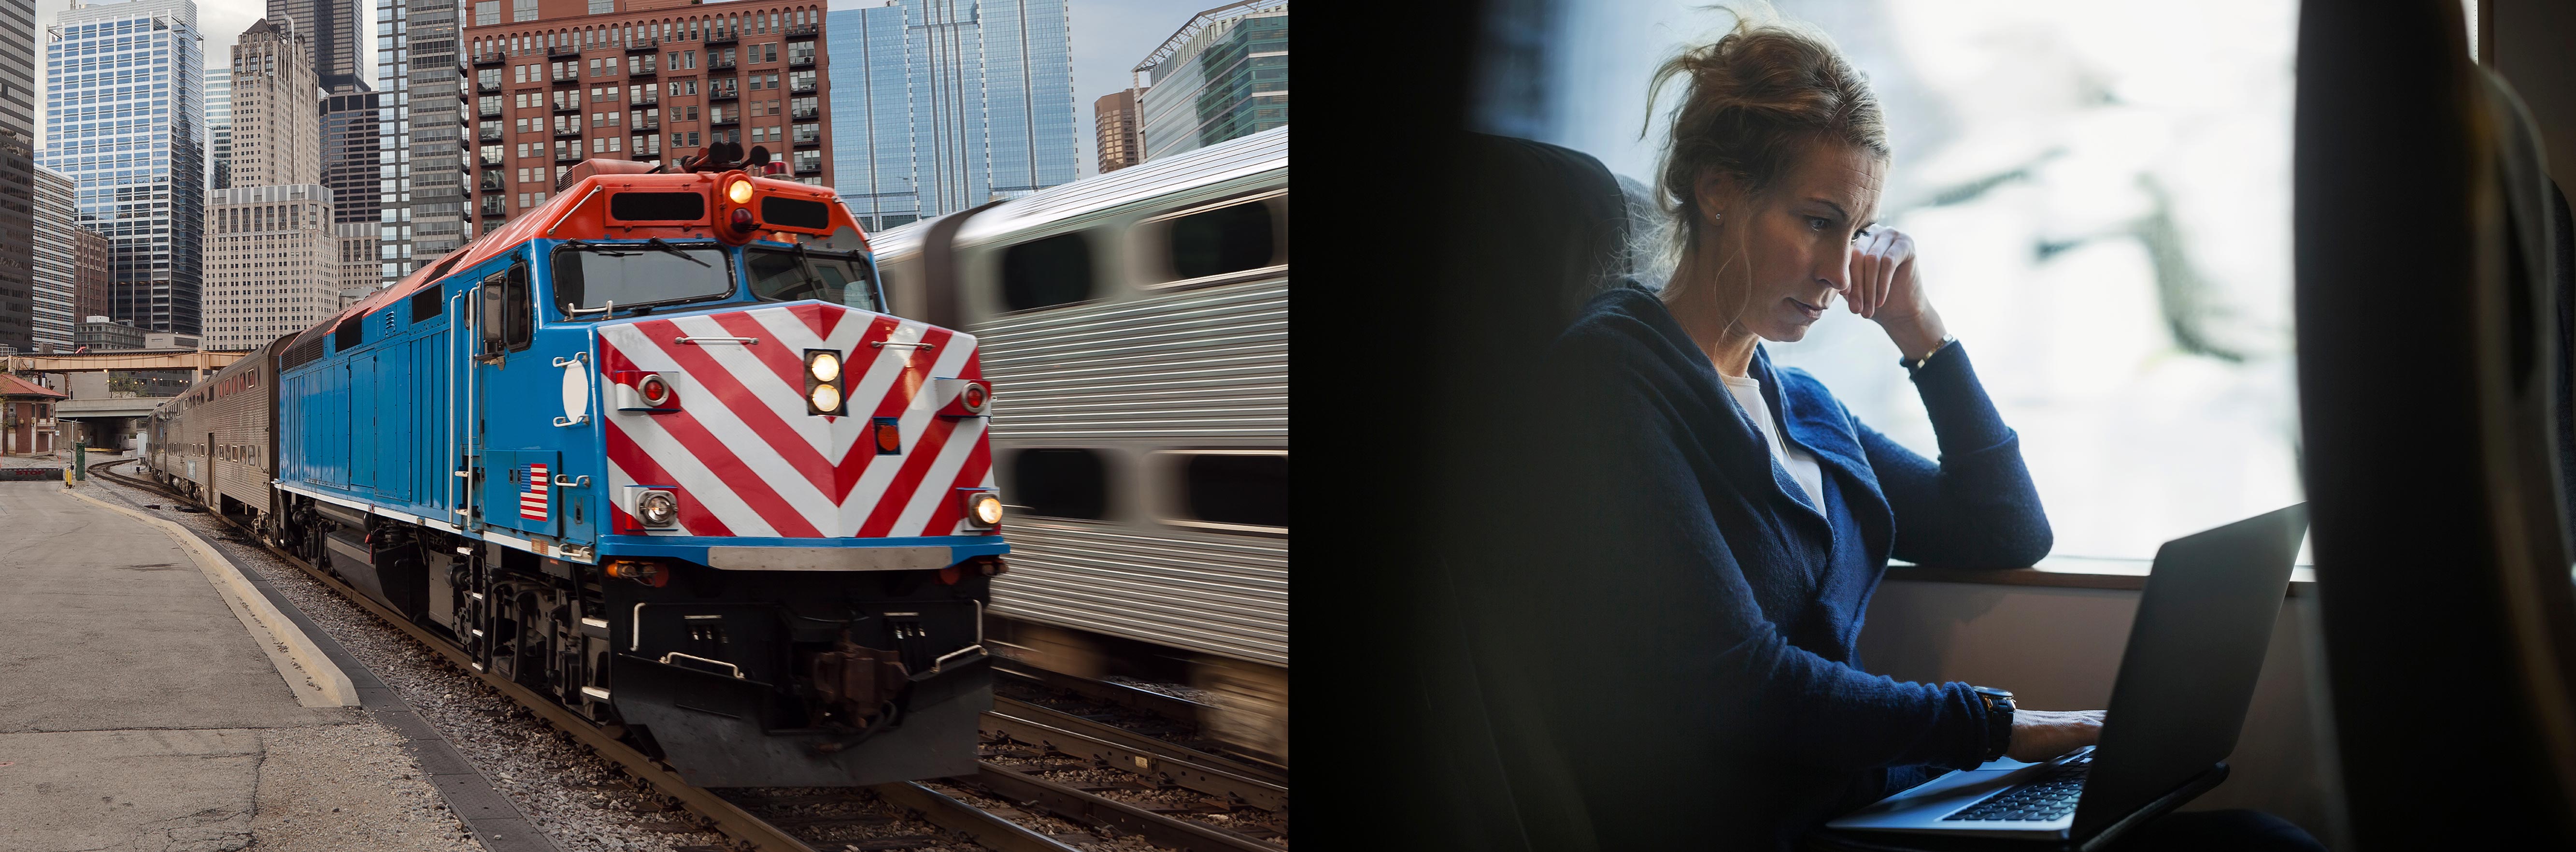 Chicago Metra train with red, white and blue locomotive, downtown district in background | business woman sitting near window of passenger train using laptop 